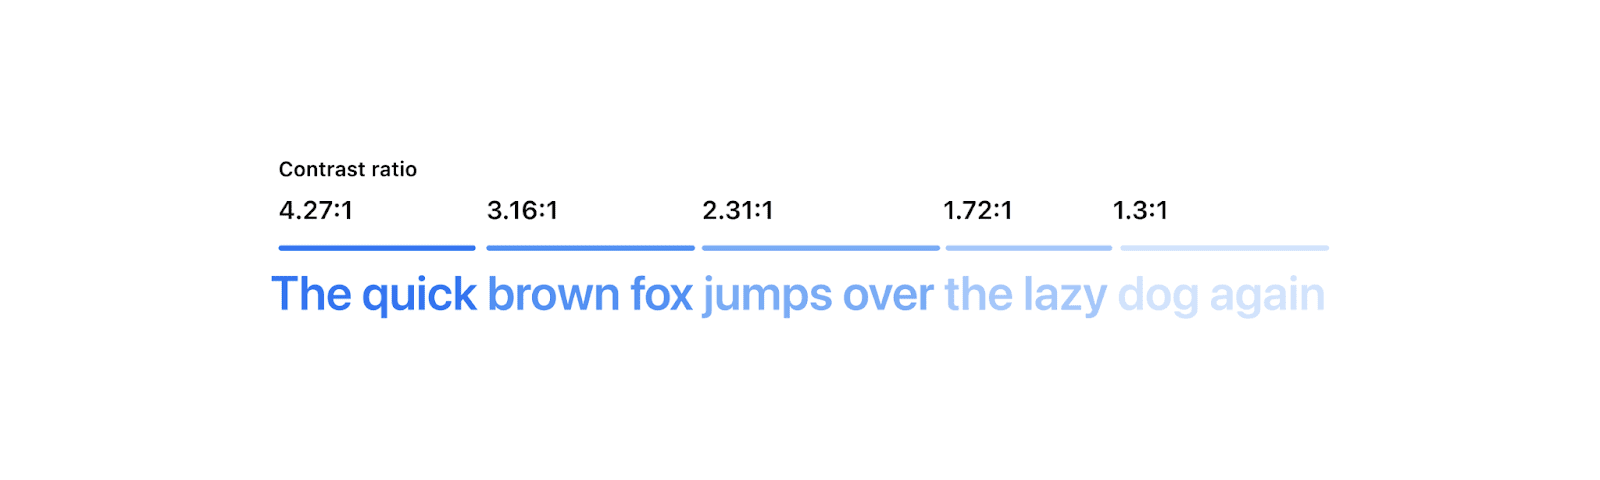 The phrase 'The quick brown fox jumps over the lazy dog again' is shown, where each word or couple of words are a lighter blue. Above each section of progressively faded words is their contrast ratio score. The last few words are very difficult to read because of low contrast.